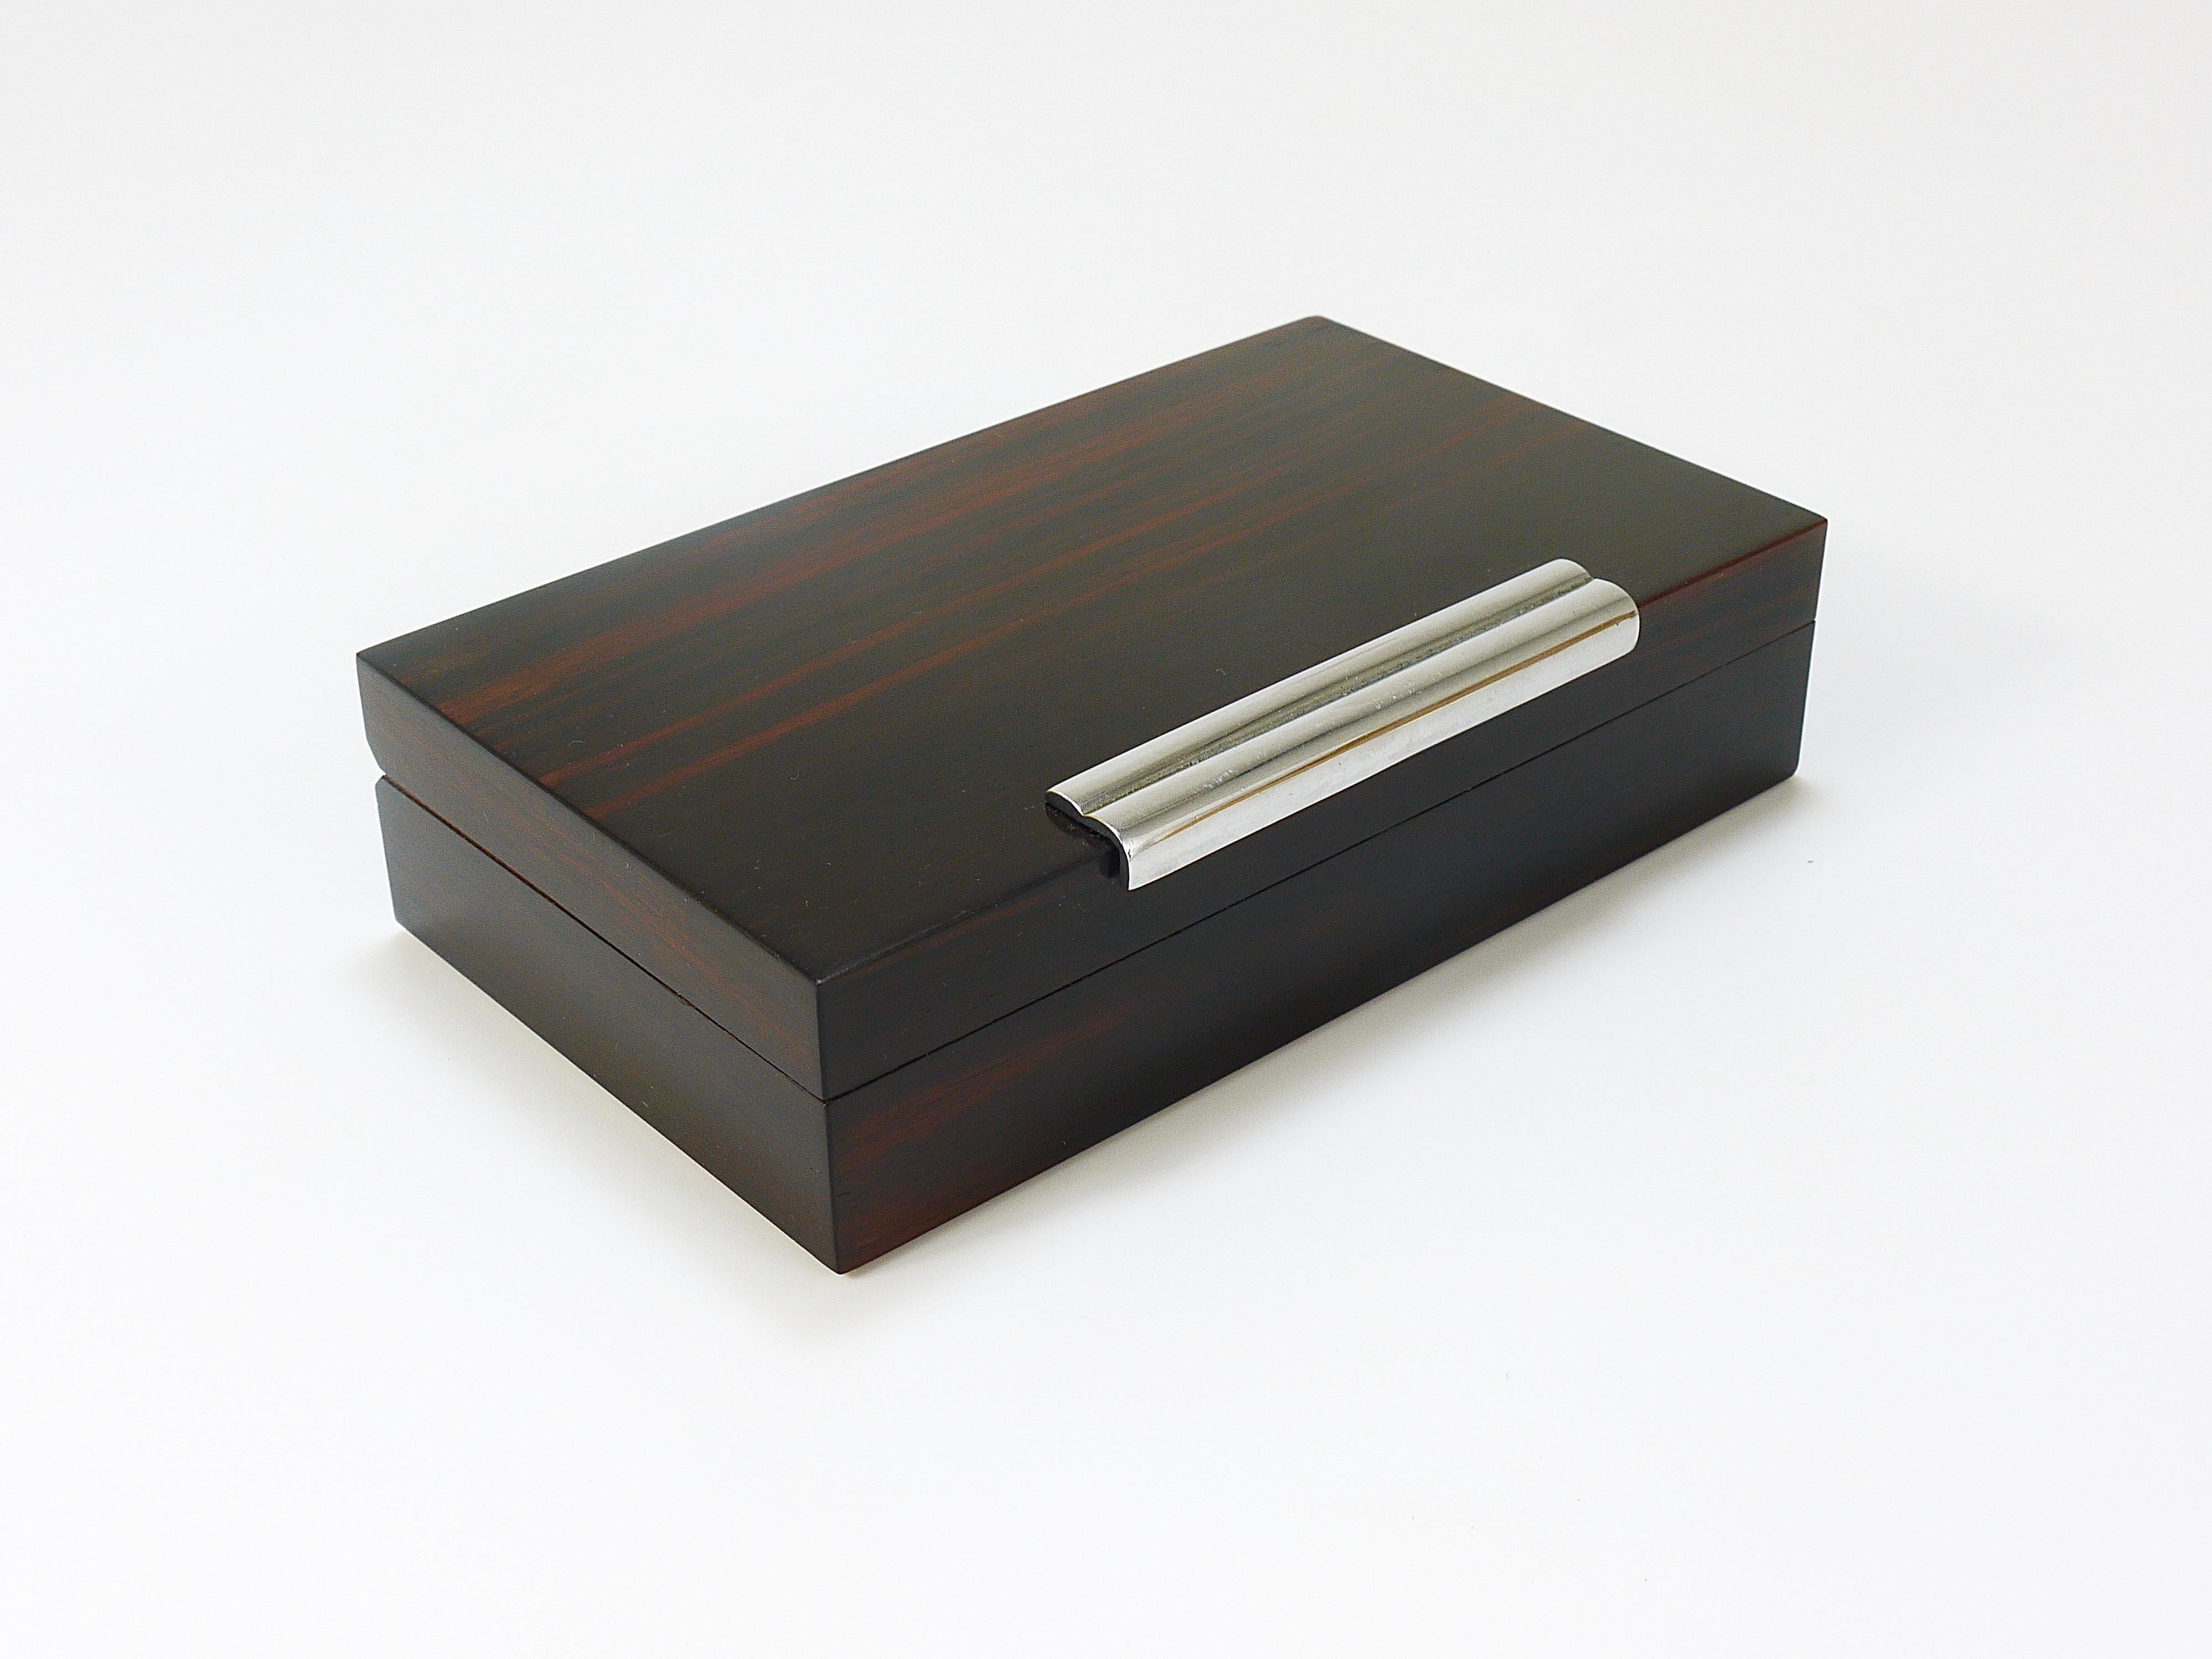 French Art Deco Rosewood & Nickel Storage Box, Maison Desny Style, France, 1930s For Sale 2